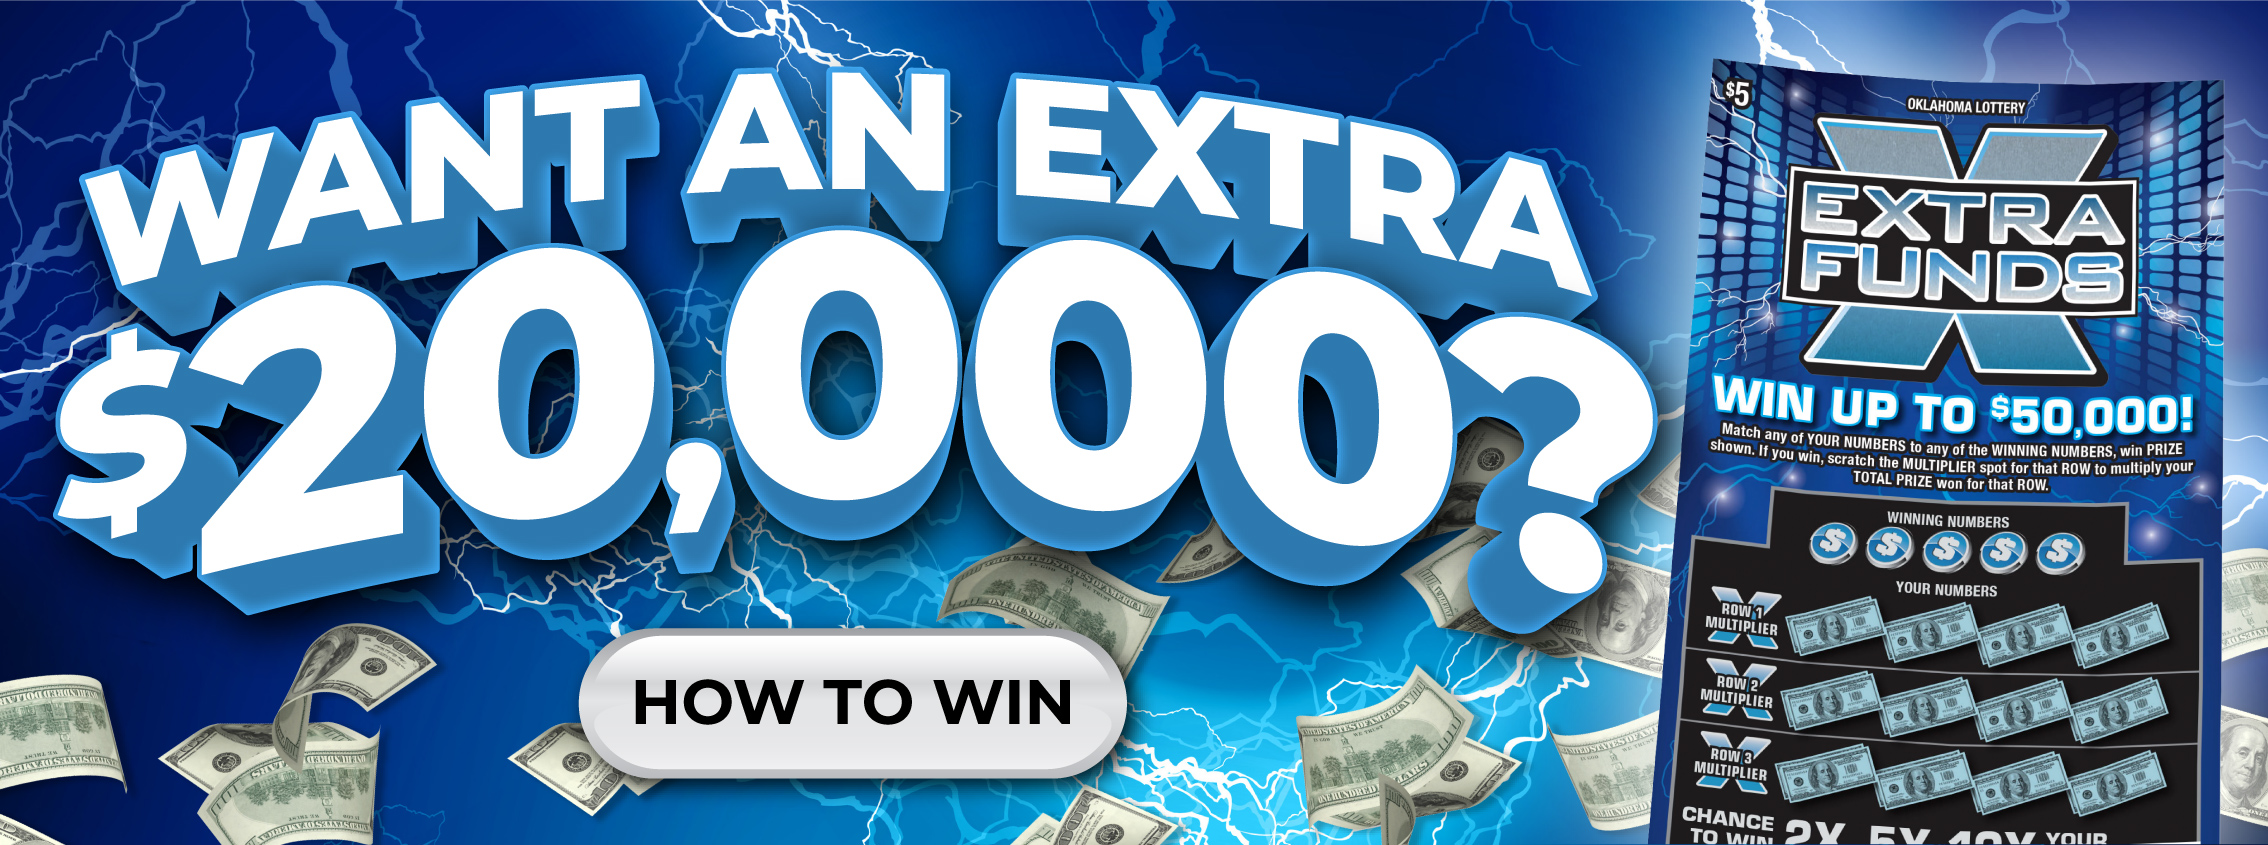 Enter Extra Funds tickets for a chance to win $20,000!